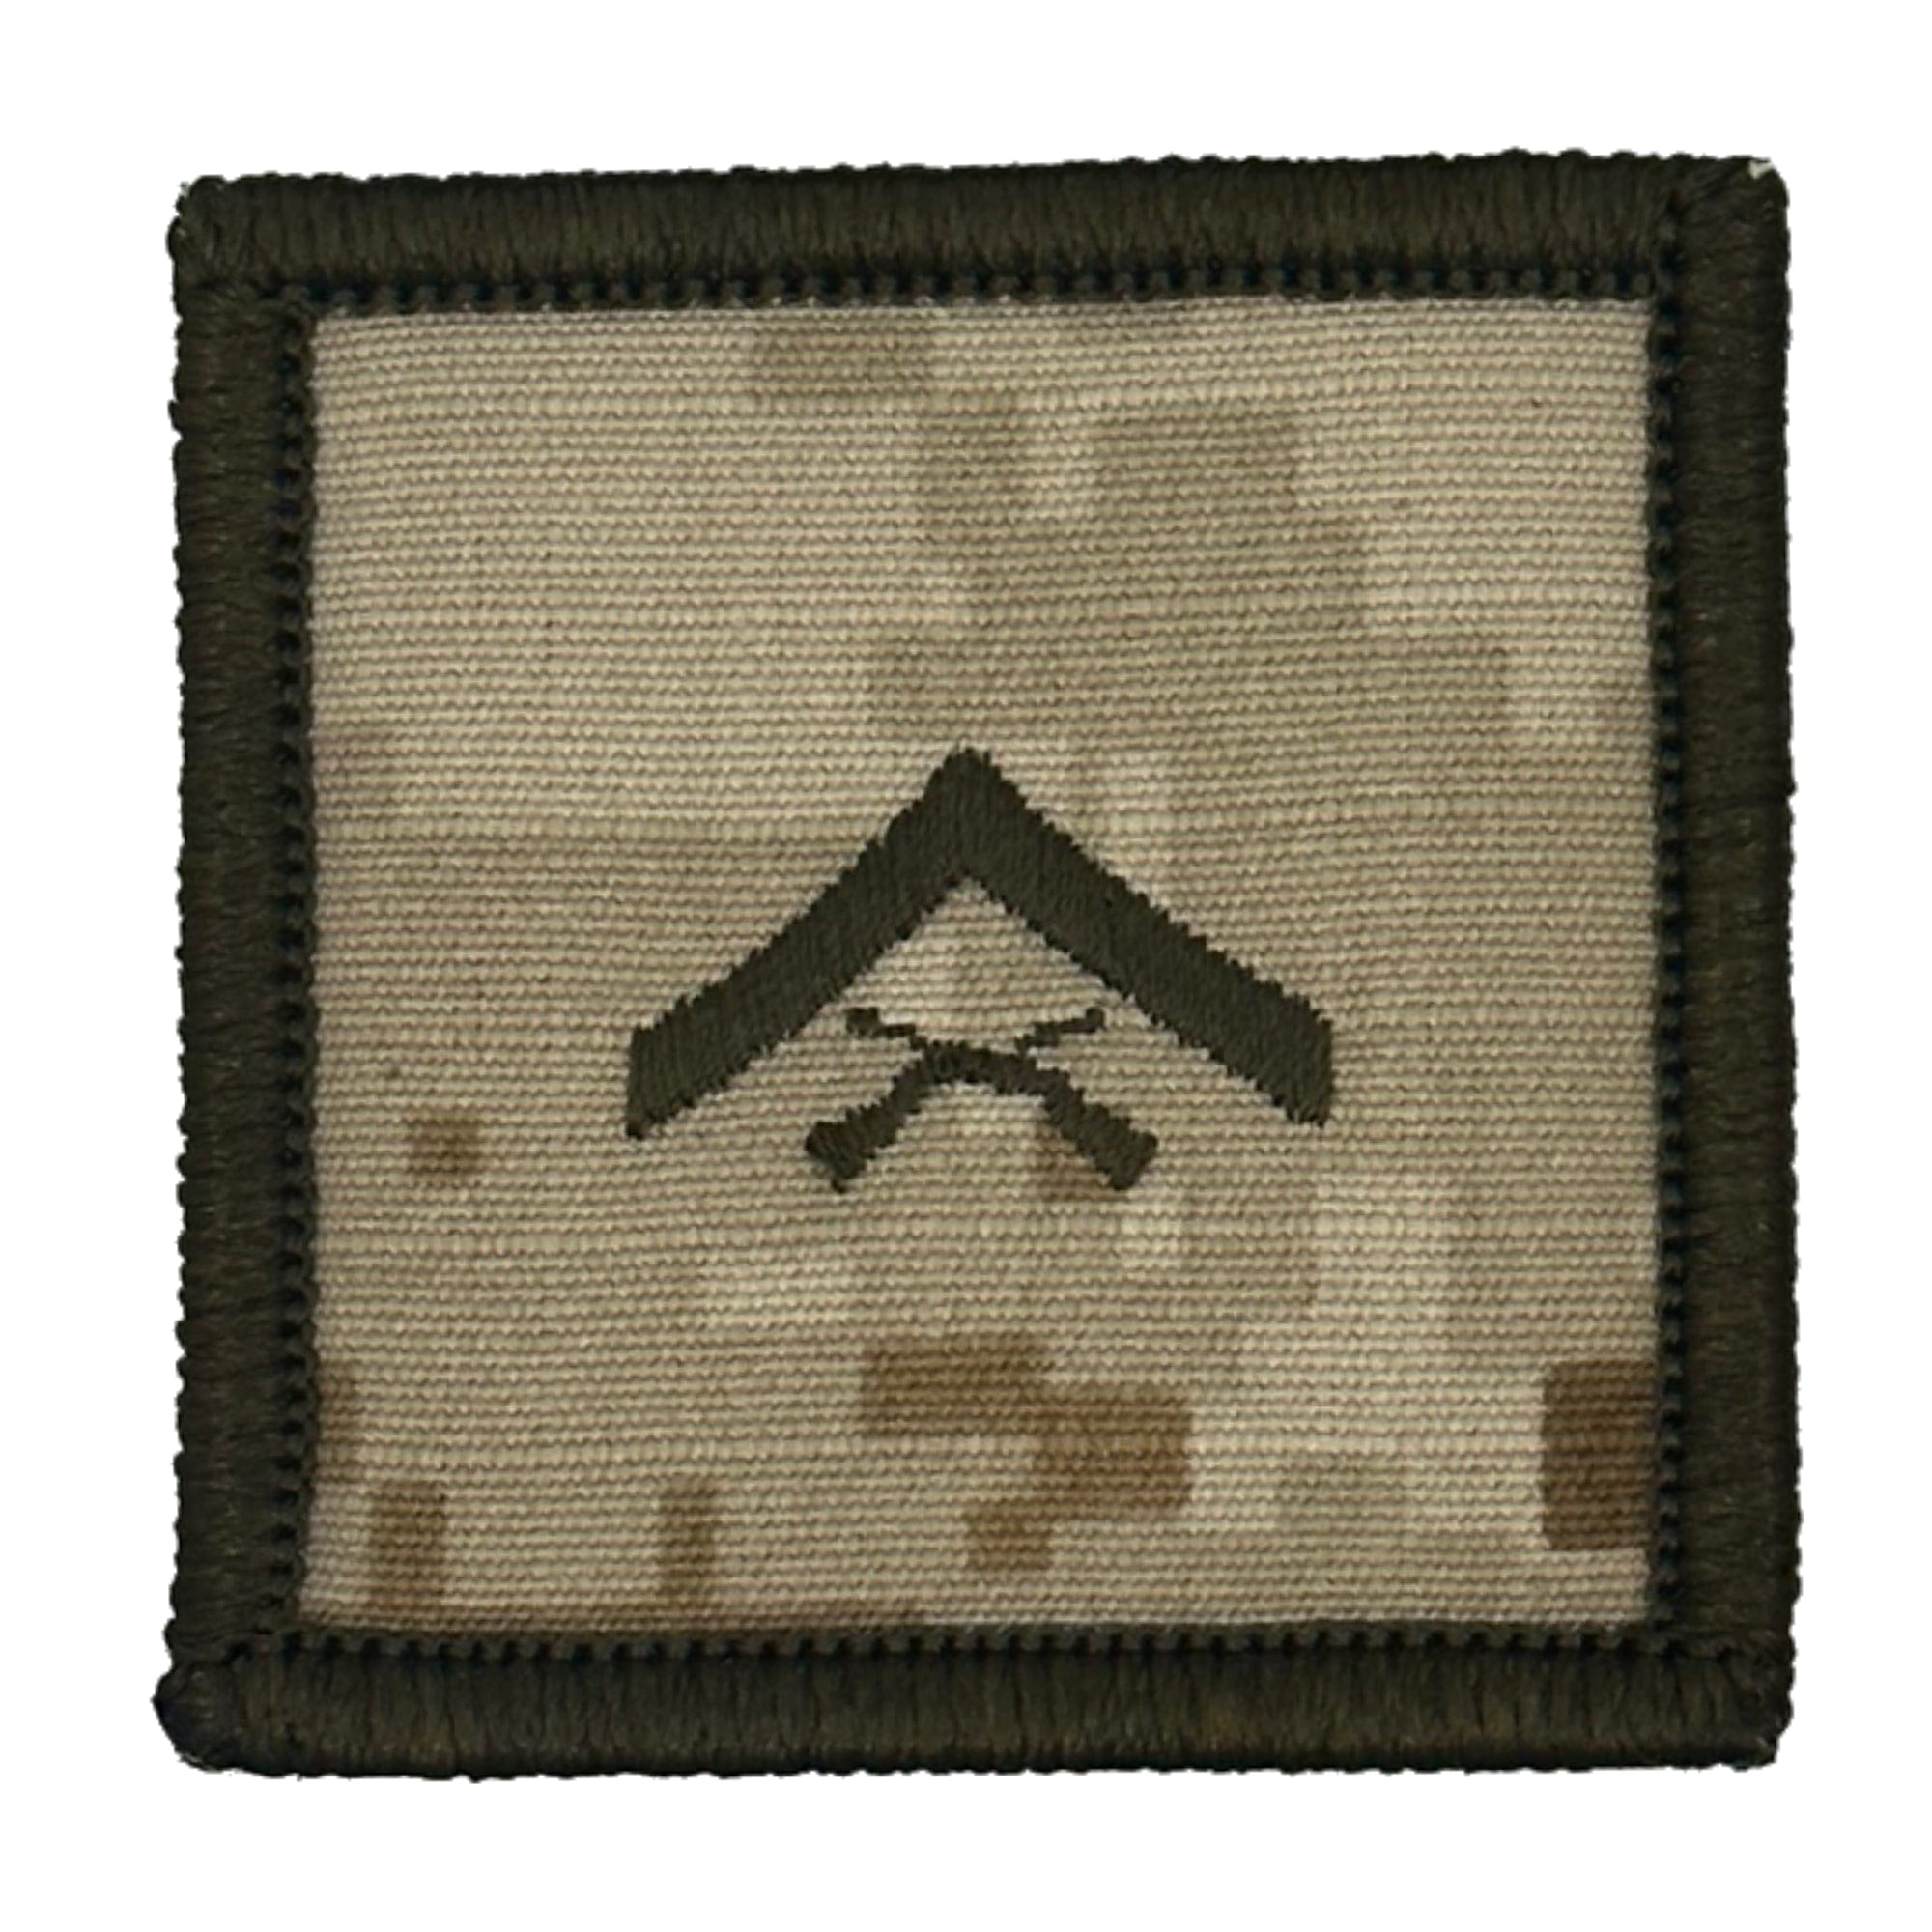 Tactical Gear Junkie Patches MARPAT Desert / Lance Corporal USMC Rank Insignia - 2x2 Patch